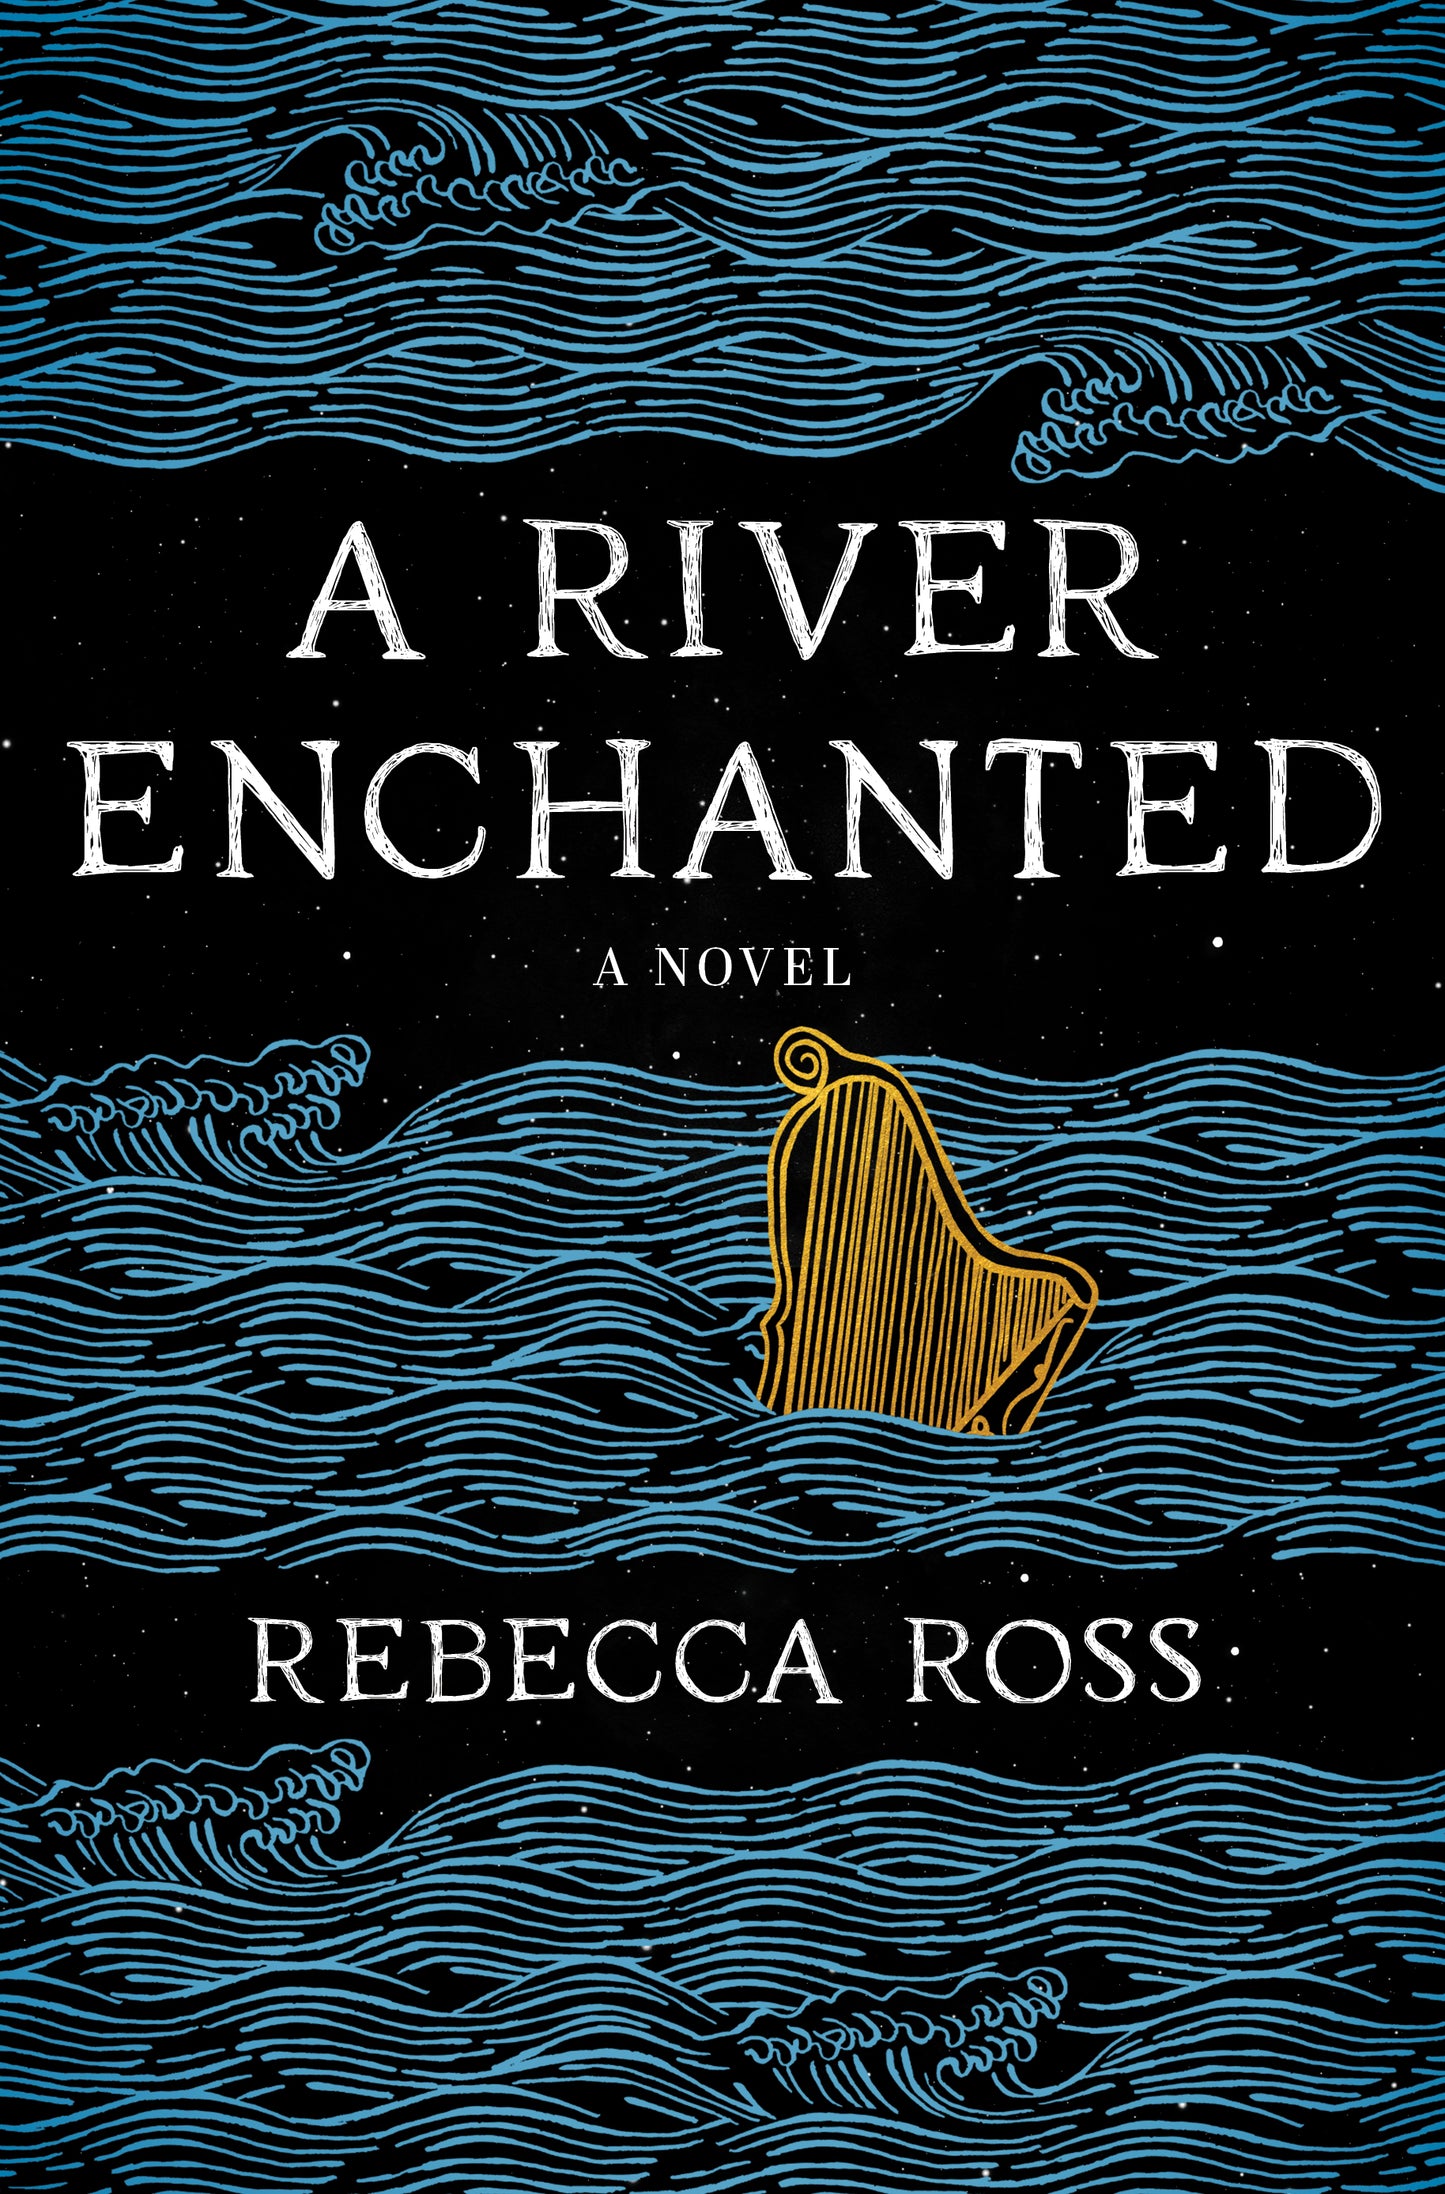 A River Enchanted (Elements of Cadence #1) (Paperback)